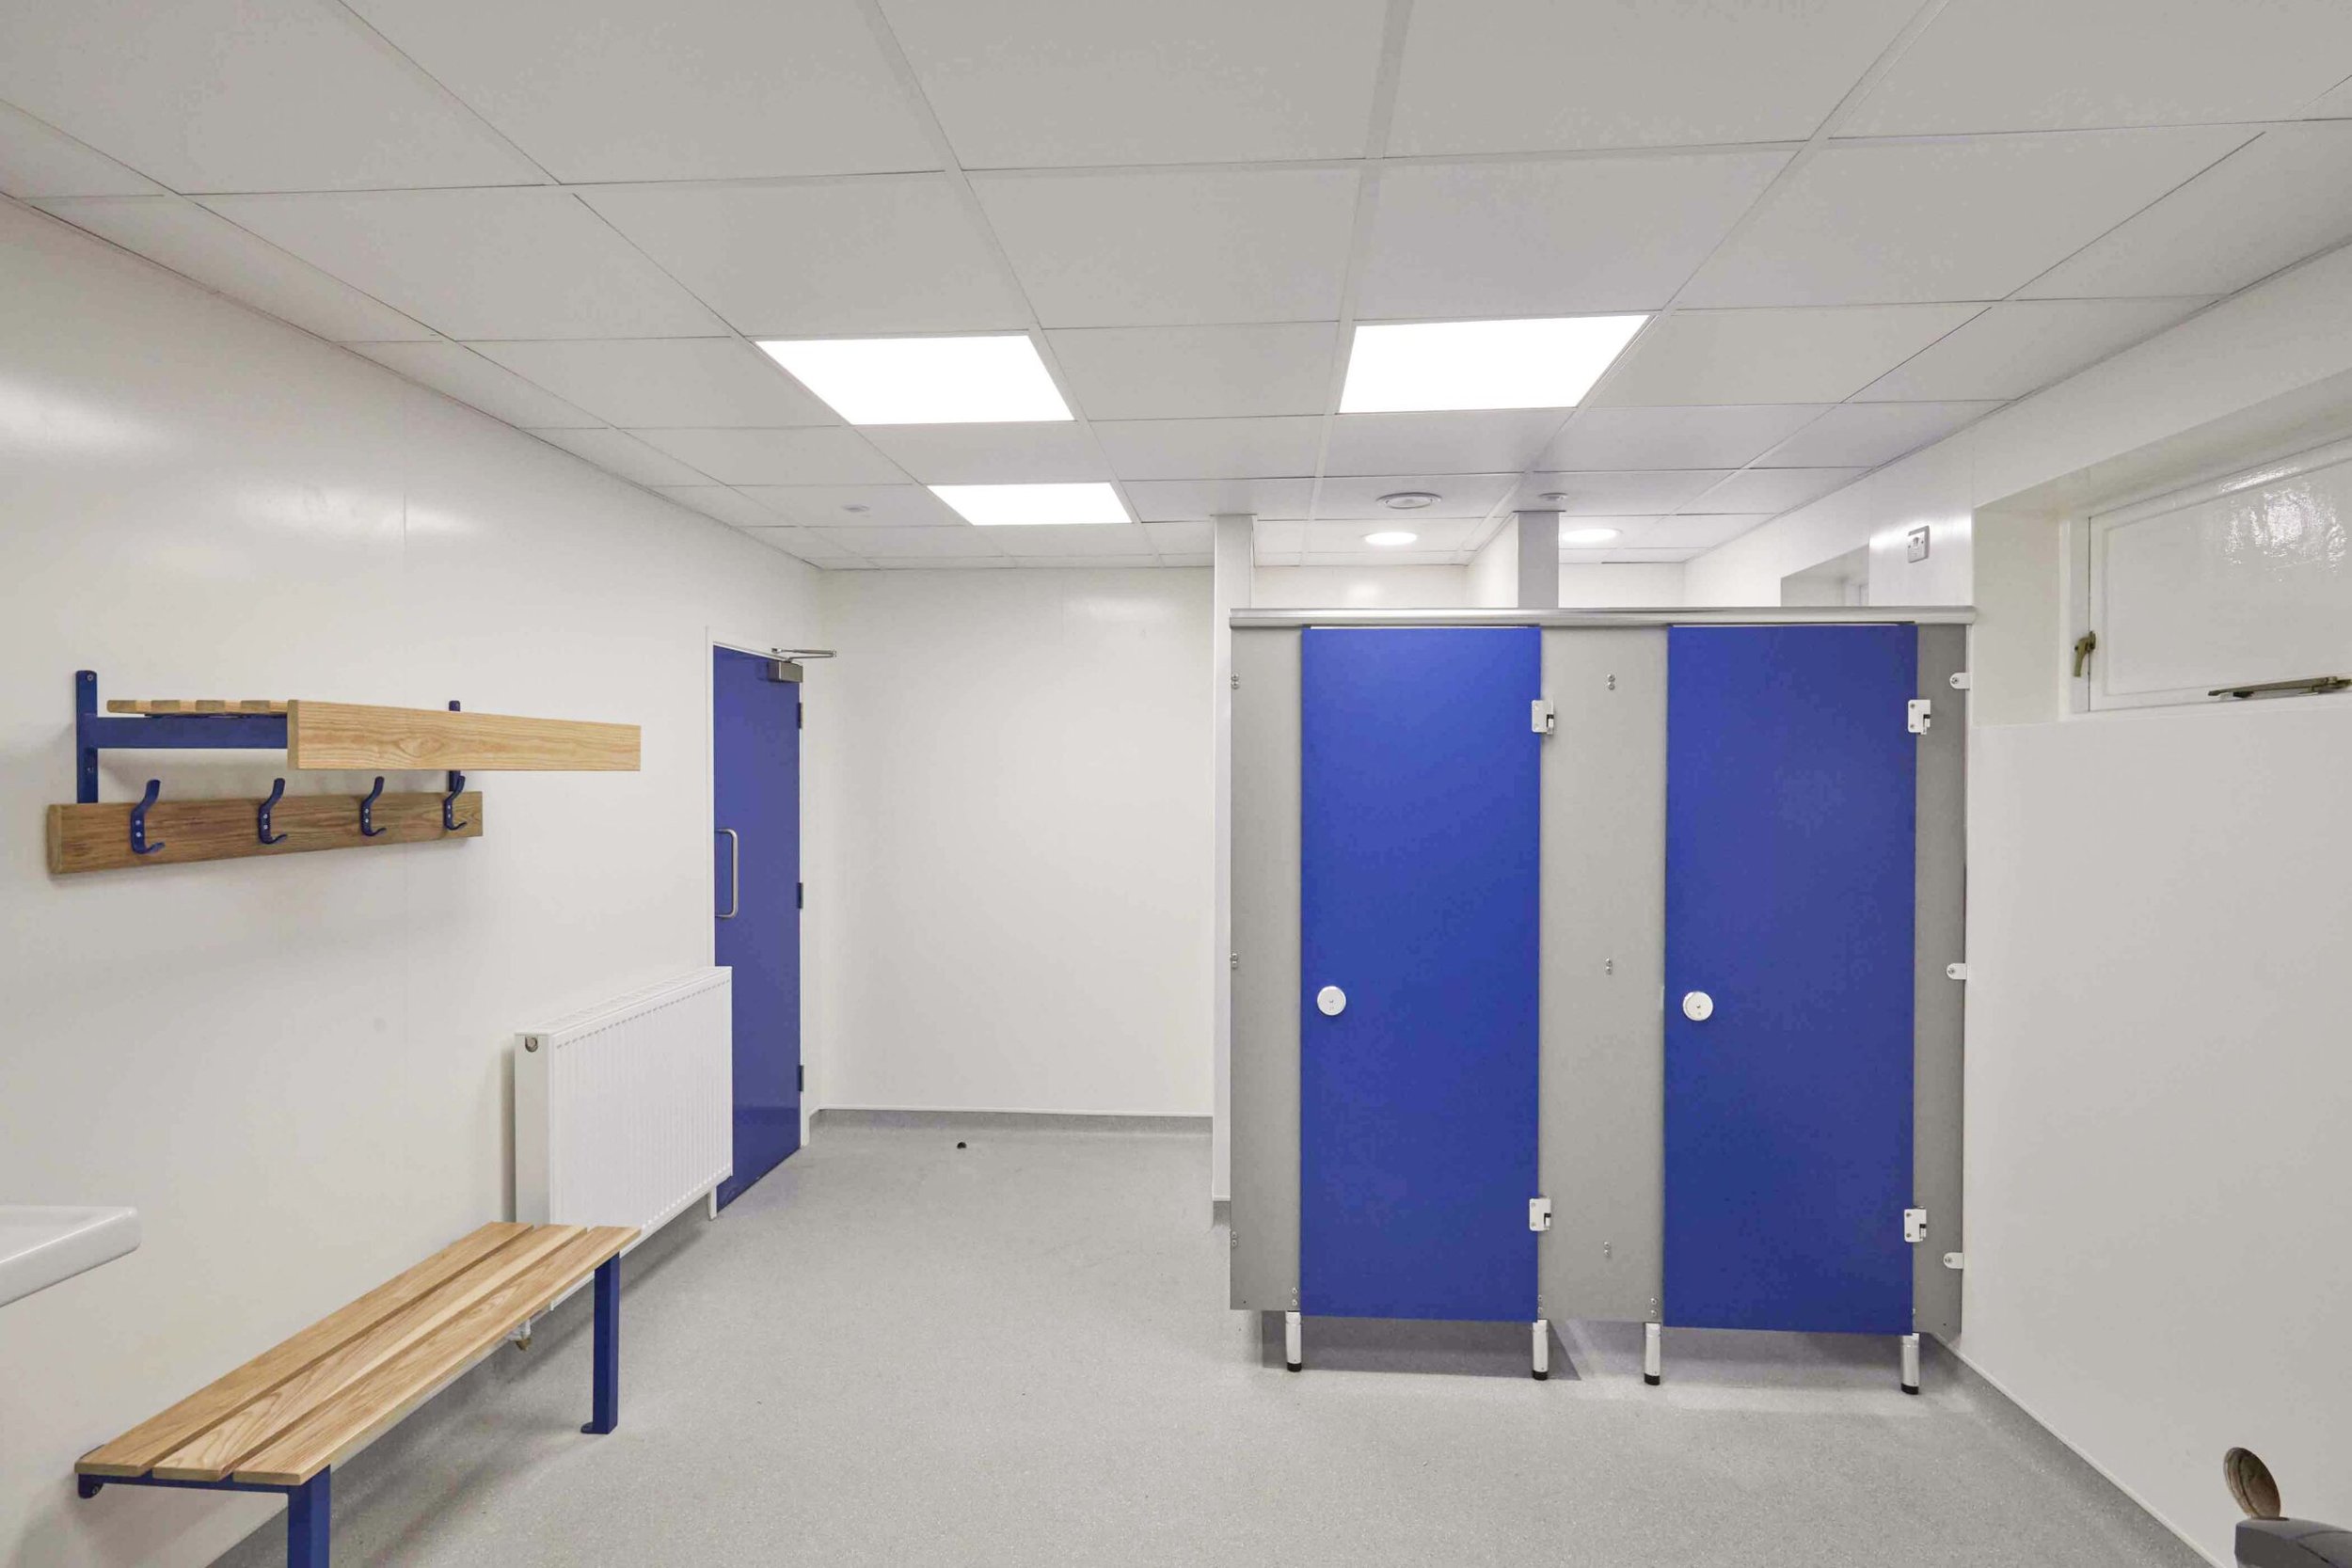  shower cubicles and benching in a changing room refurbishment at secondary school 